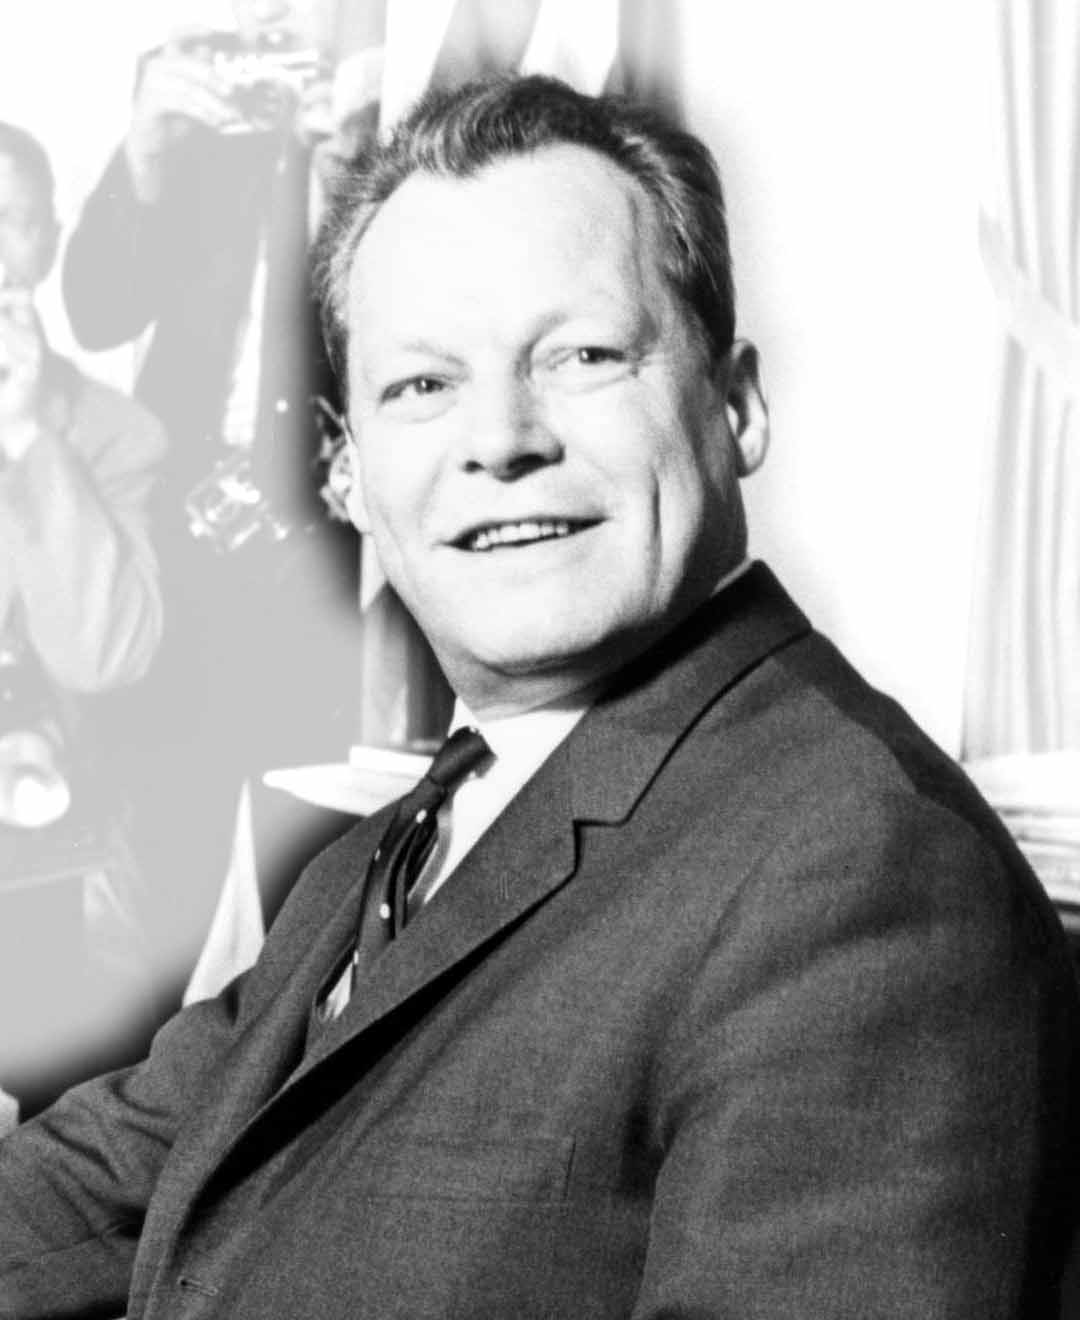 Brandt Report is the report written by the Independent Commission, first chaired by Willy Brandt (the former German Chancellor) in 1980